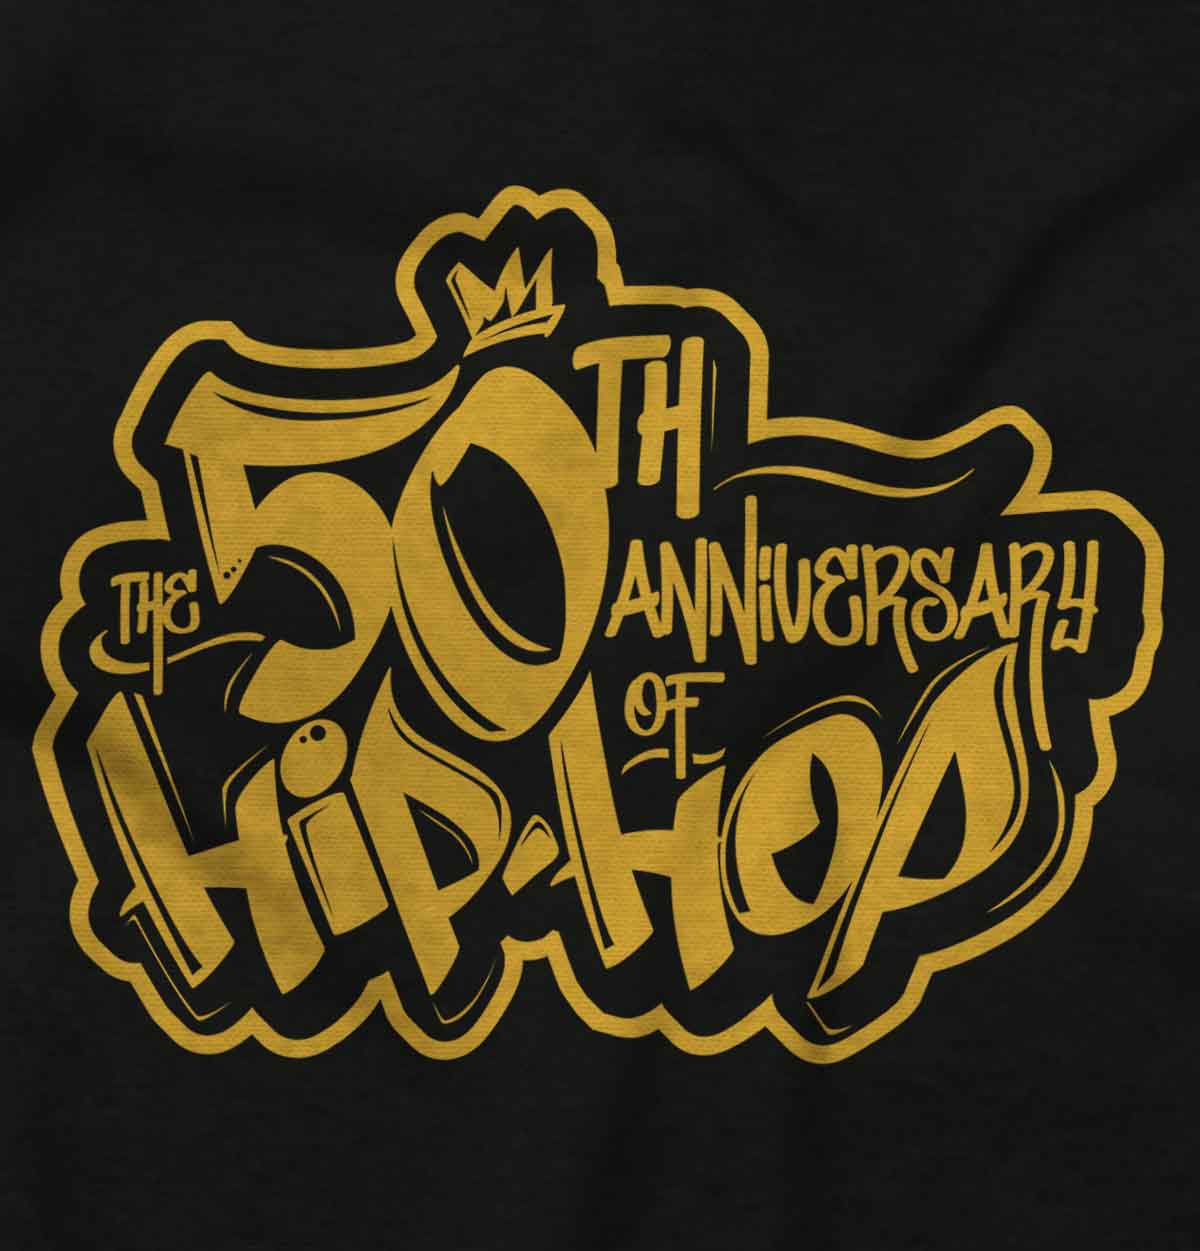 This image showcases the heartwarming bond within the hip-hop community on the streets. It celebrates the unity and positivity that hip-hop has brought to the world for 50 years. Feel inspired and share the love!